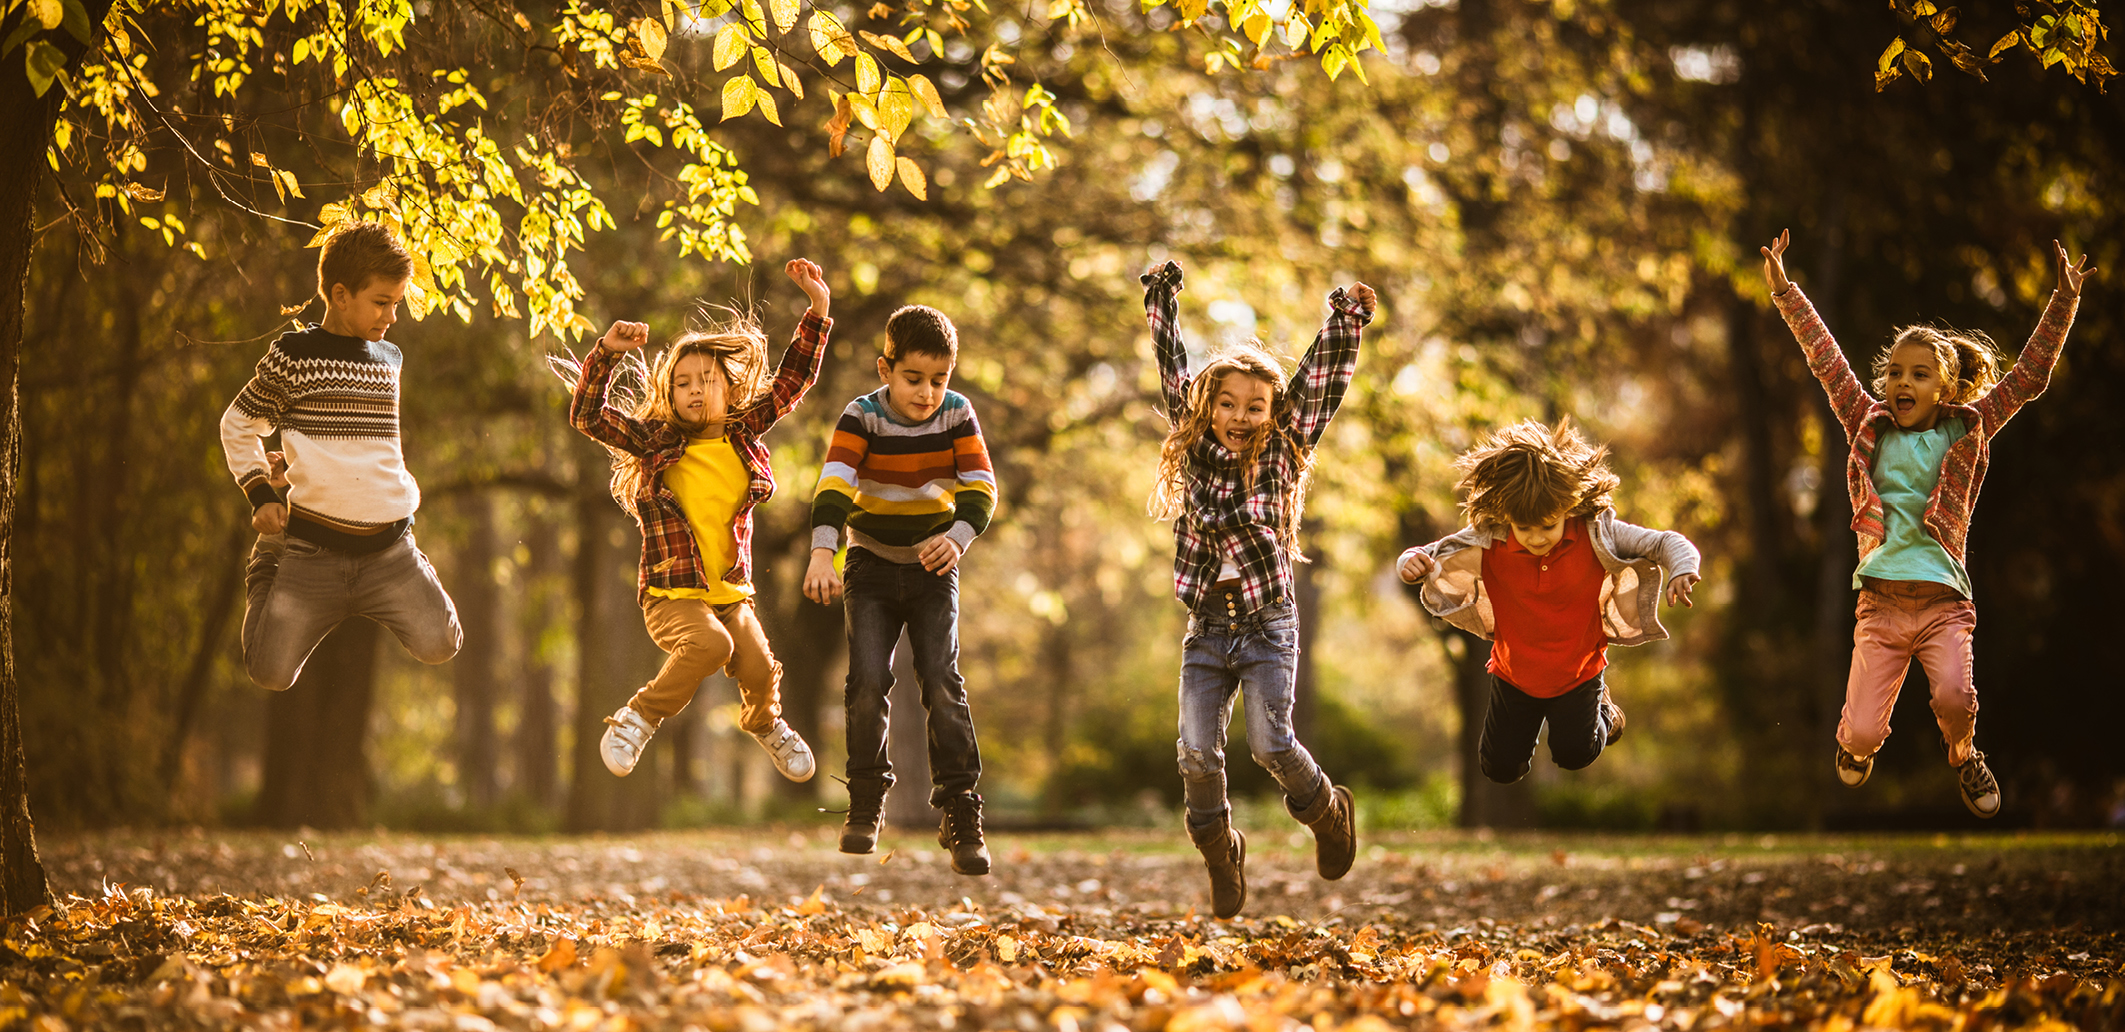 Pumpkin Bars and Playing in the Leaves: